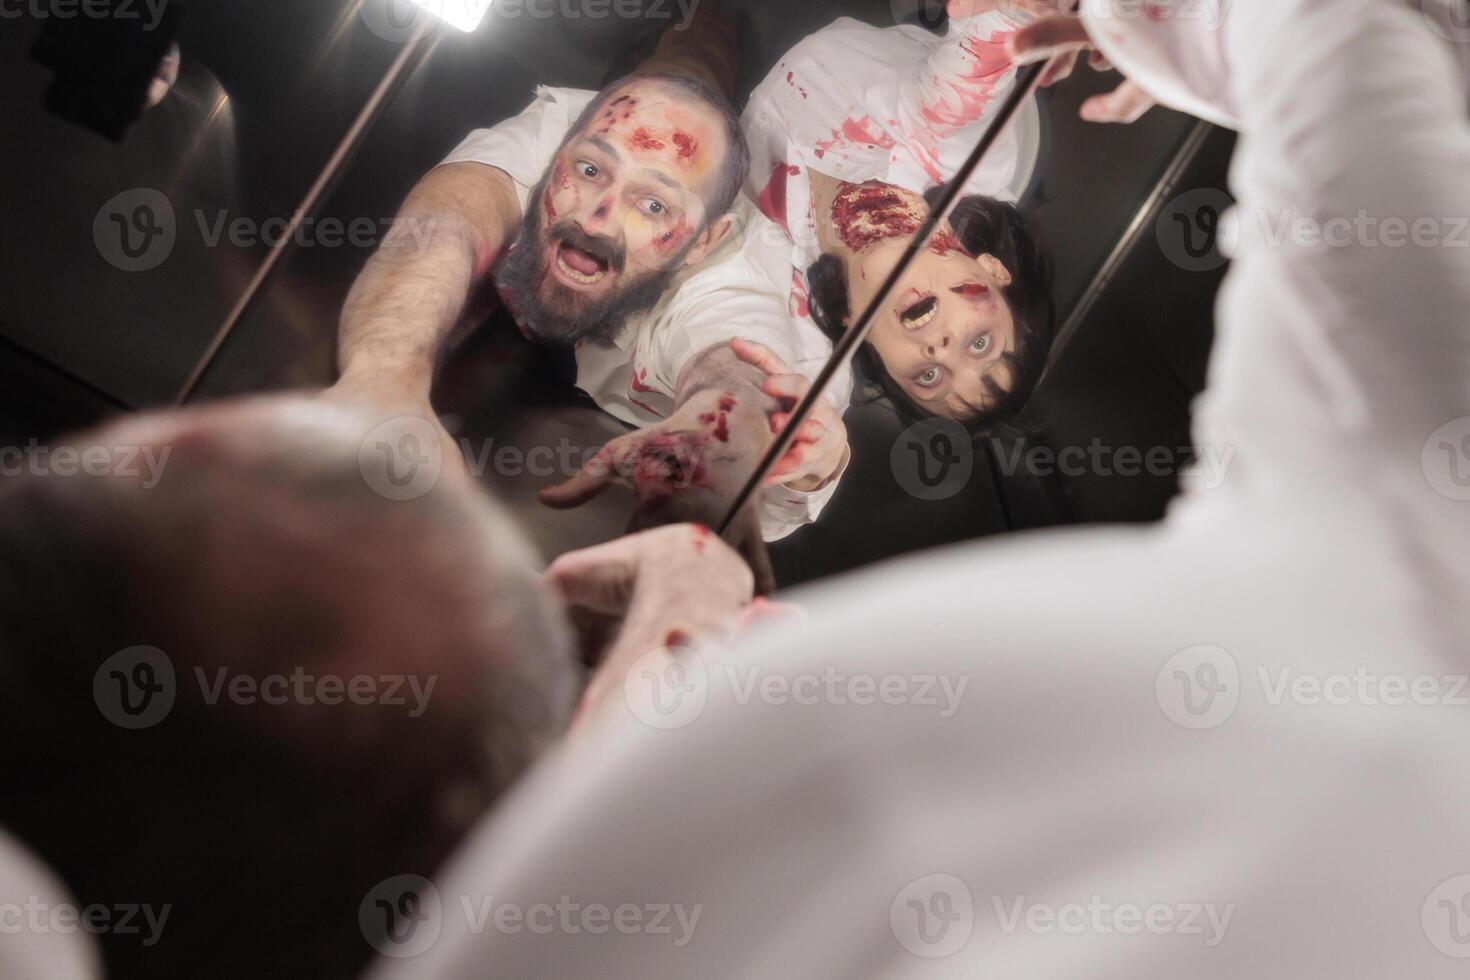 People infected by virus during outbreak turned into zombies looking in elevator mirror. Devil reanimated corpses filled with blood and scars stuck in escalator during apocalypse photo